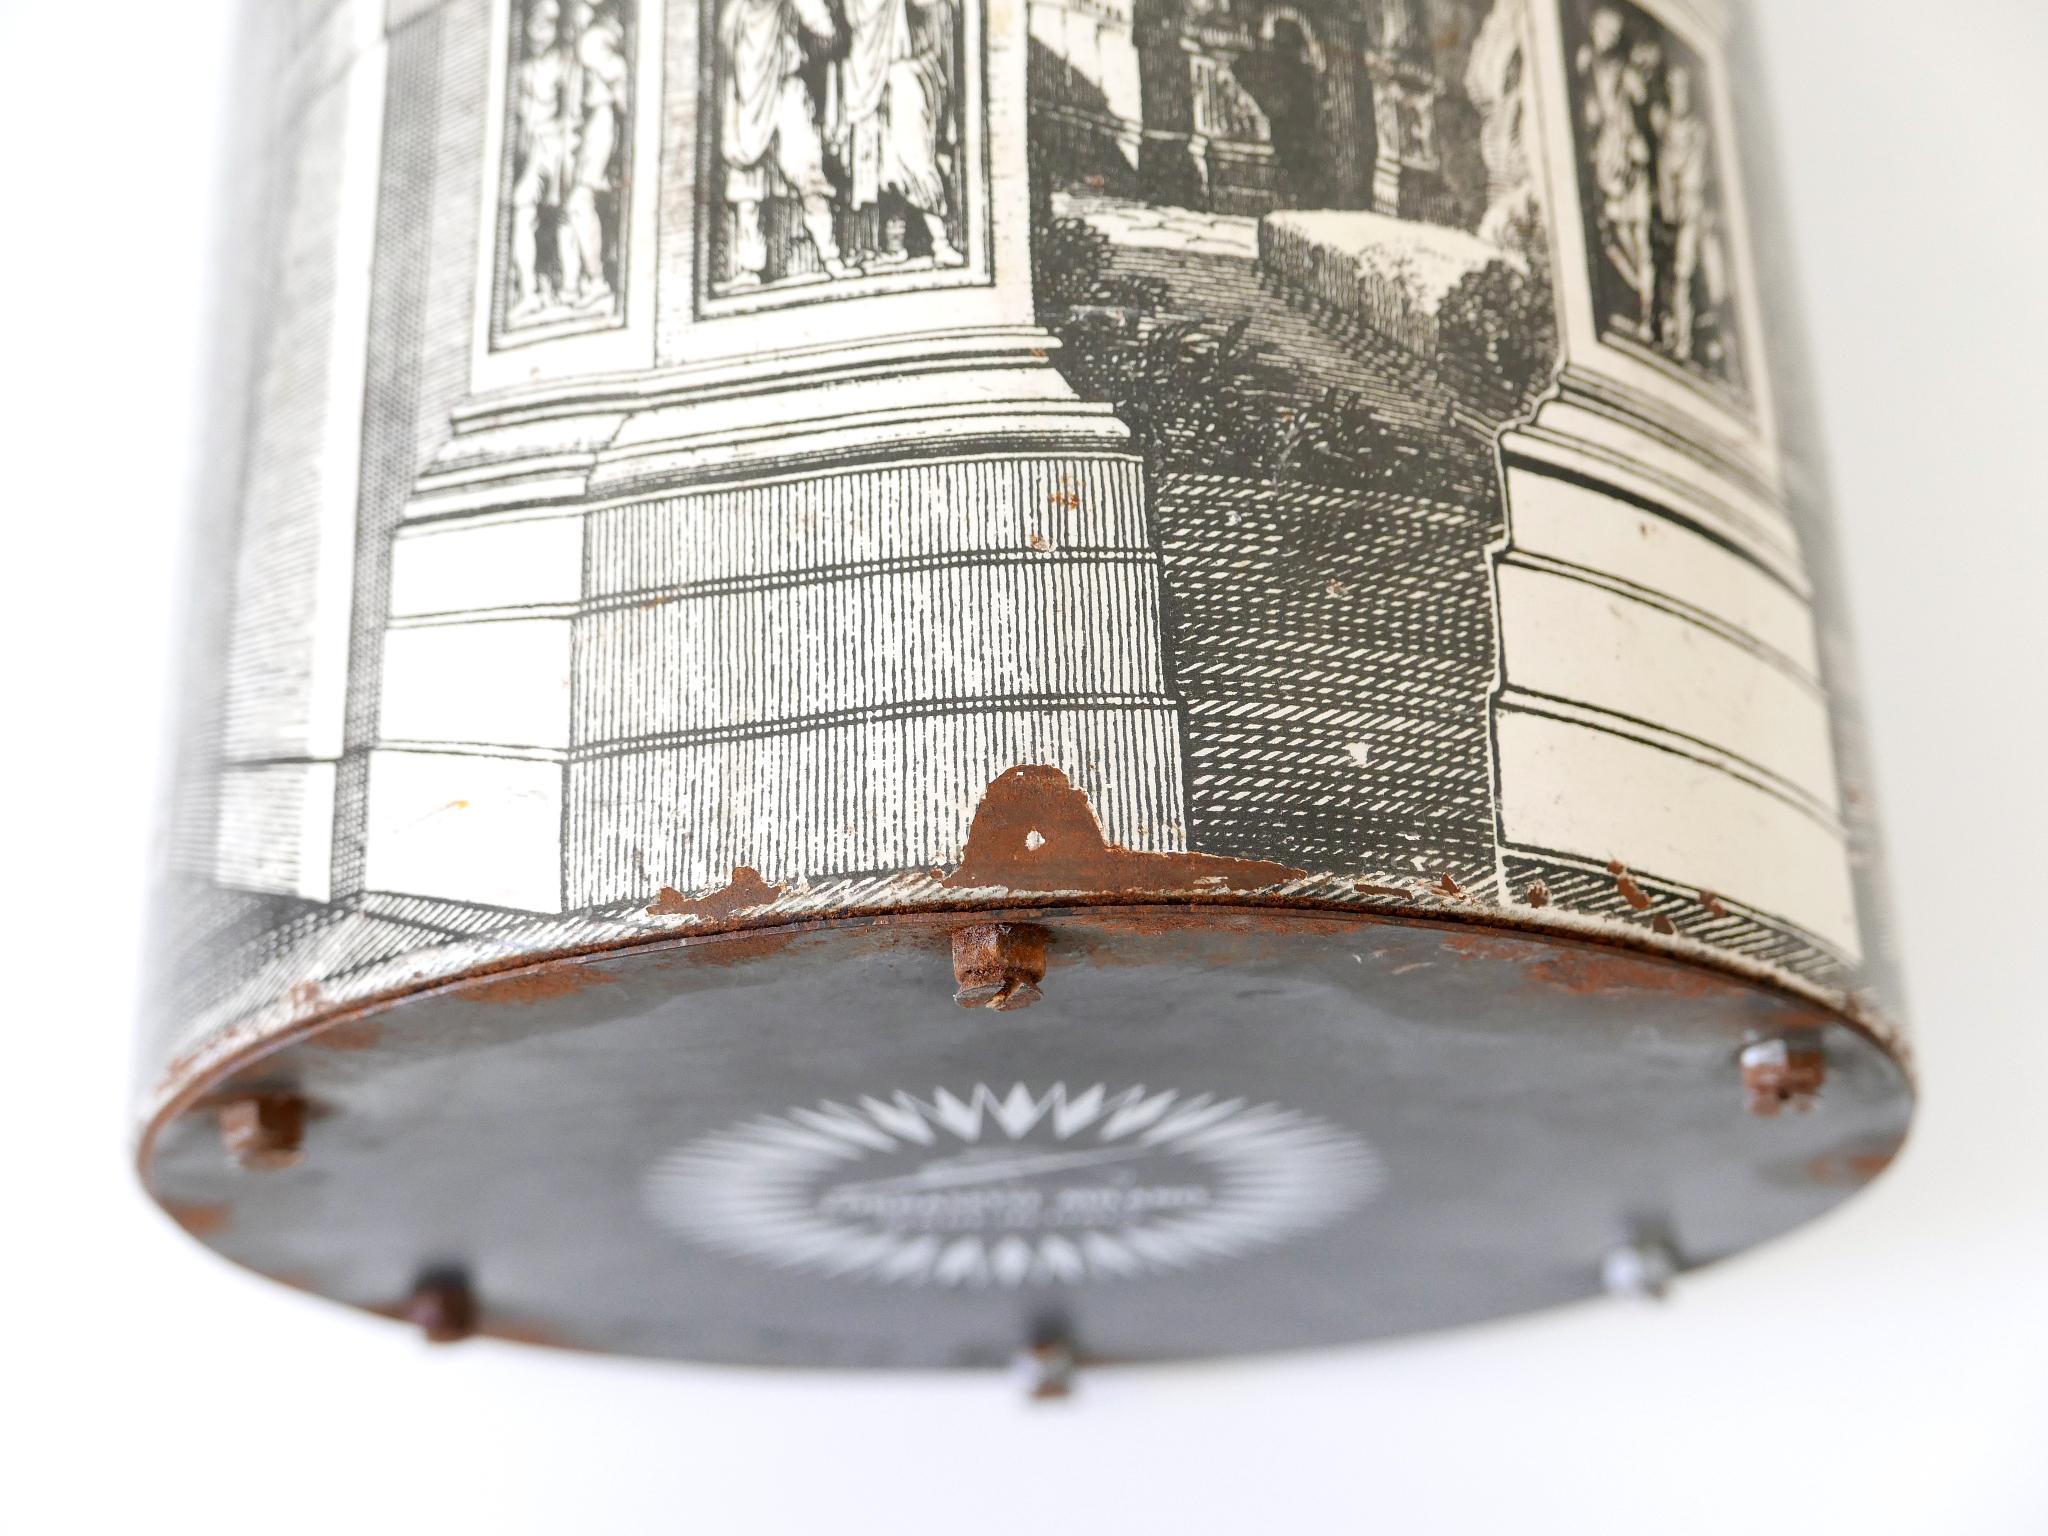 Early Mid-Century Modern 'Roman Arch' Umbrella Stand by Piero Fornasetti 1950s For Sale 13